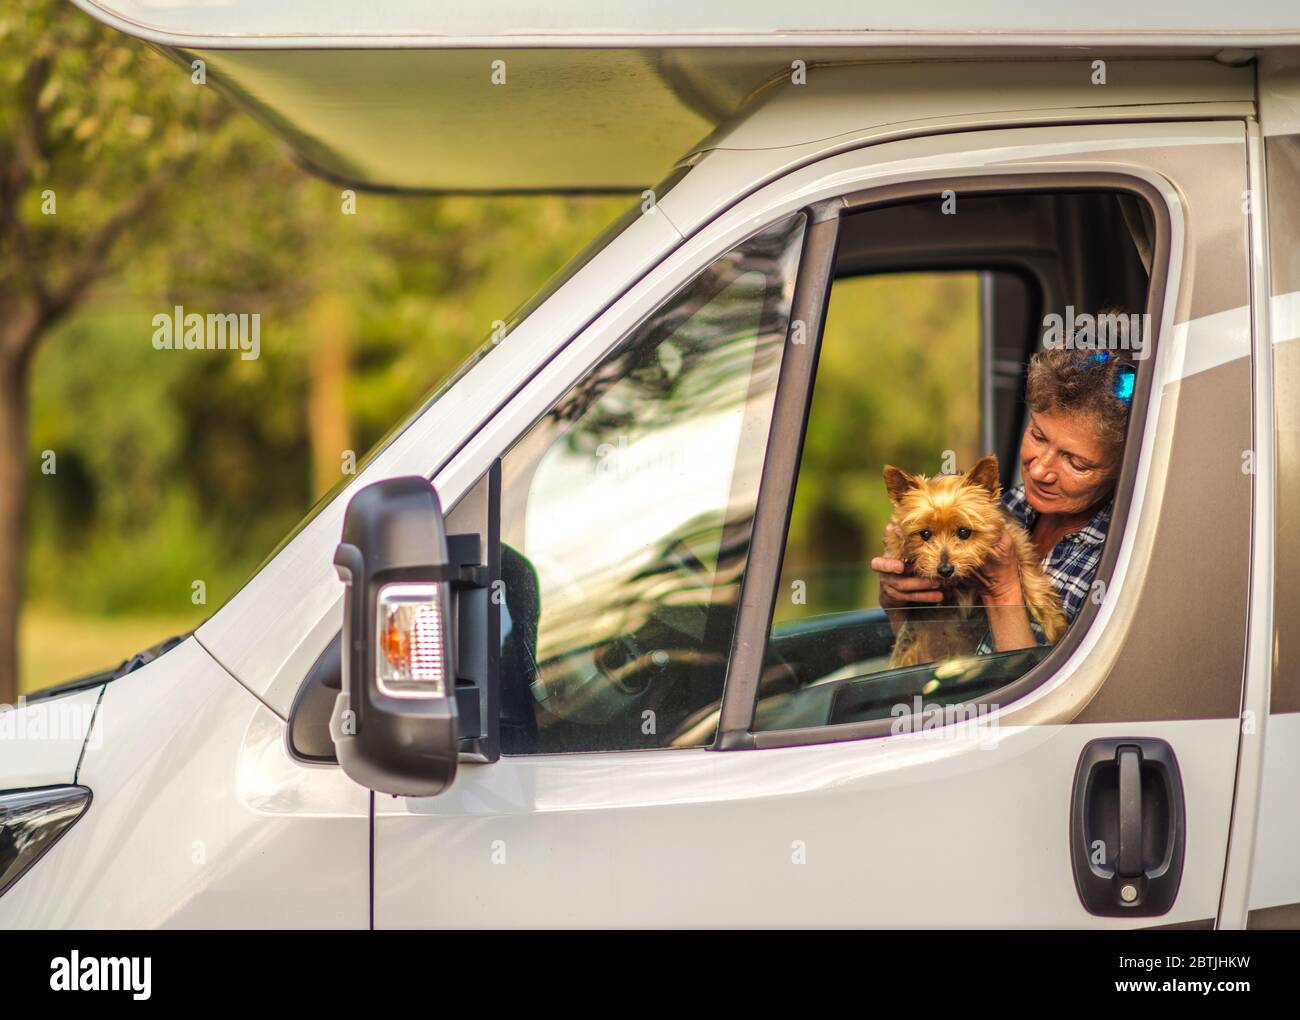 Retired Woman Traveling With Her Australian Silky Terrier Dog Pet Inside Camper Van Motorhome. Vacation on the Road. Stock Photo